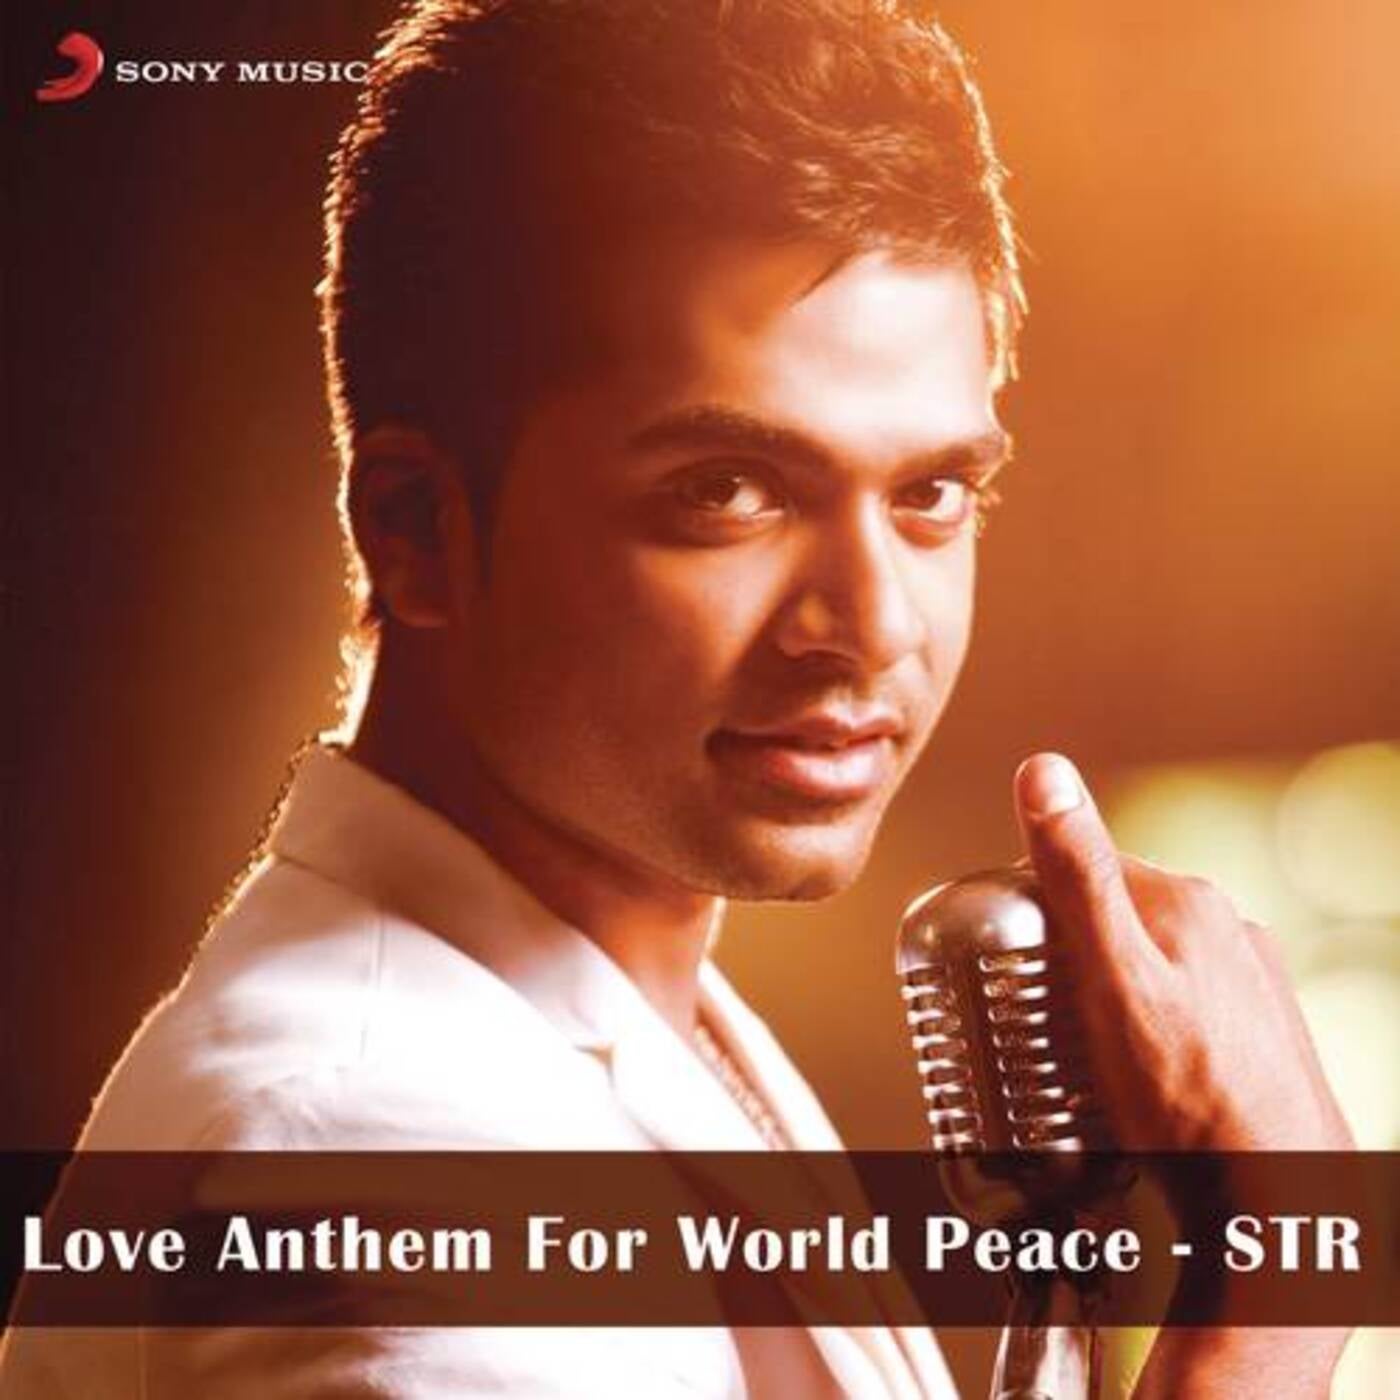 Love Anthem for World Peace by STR